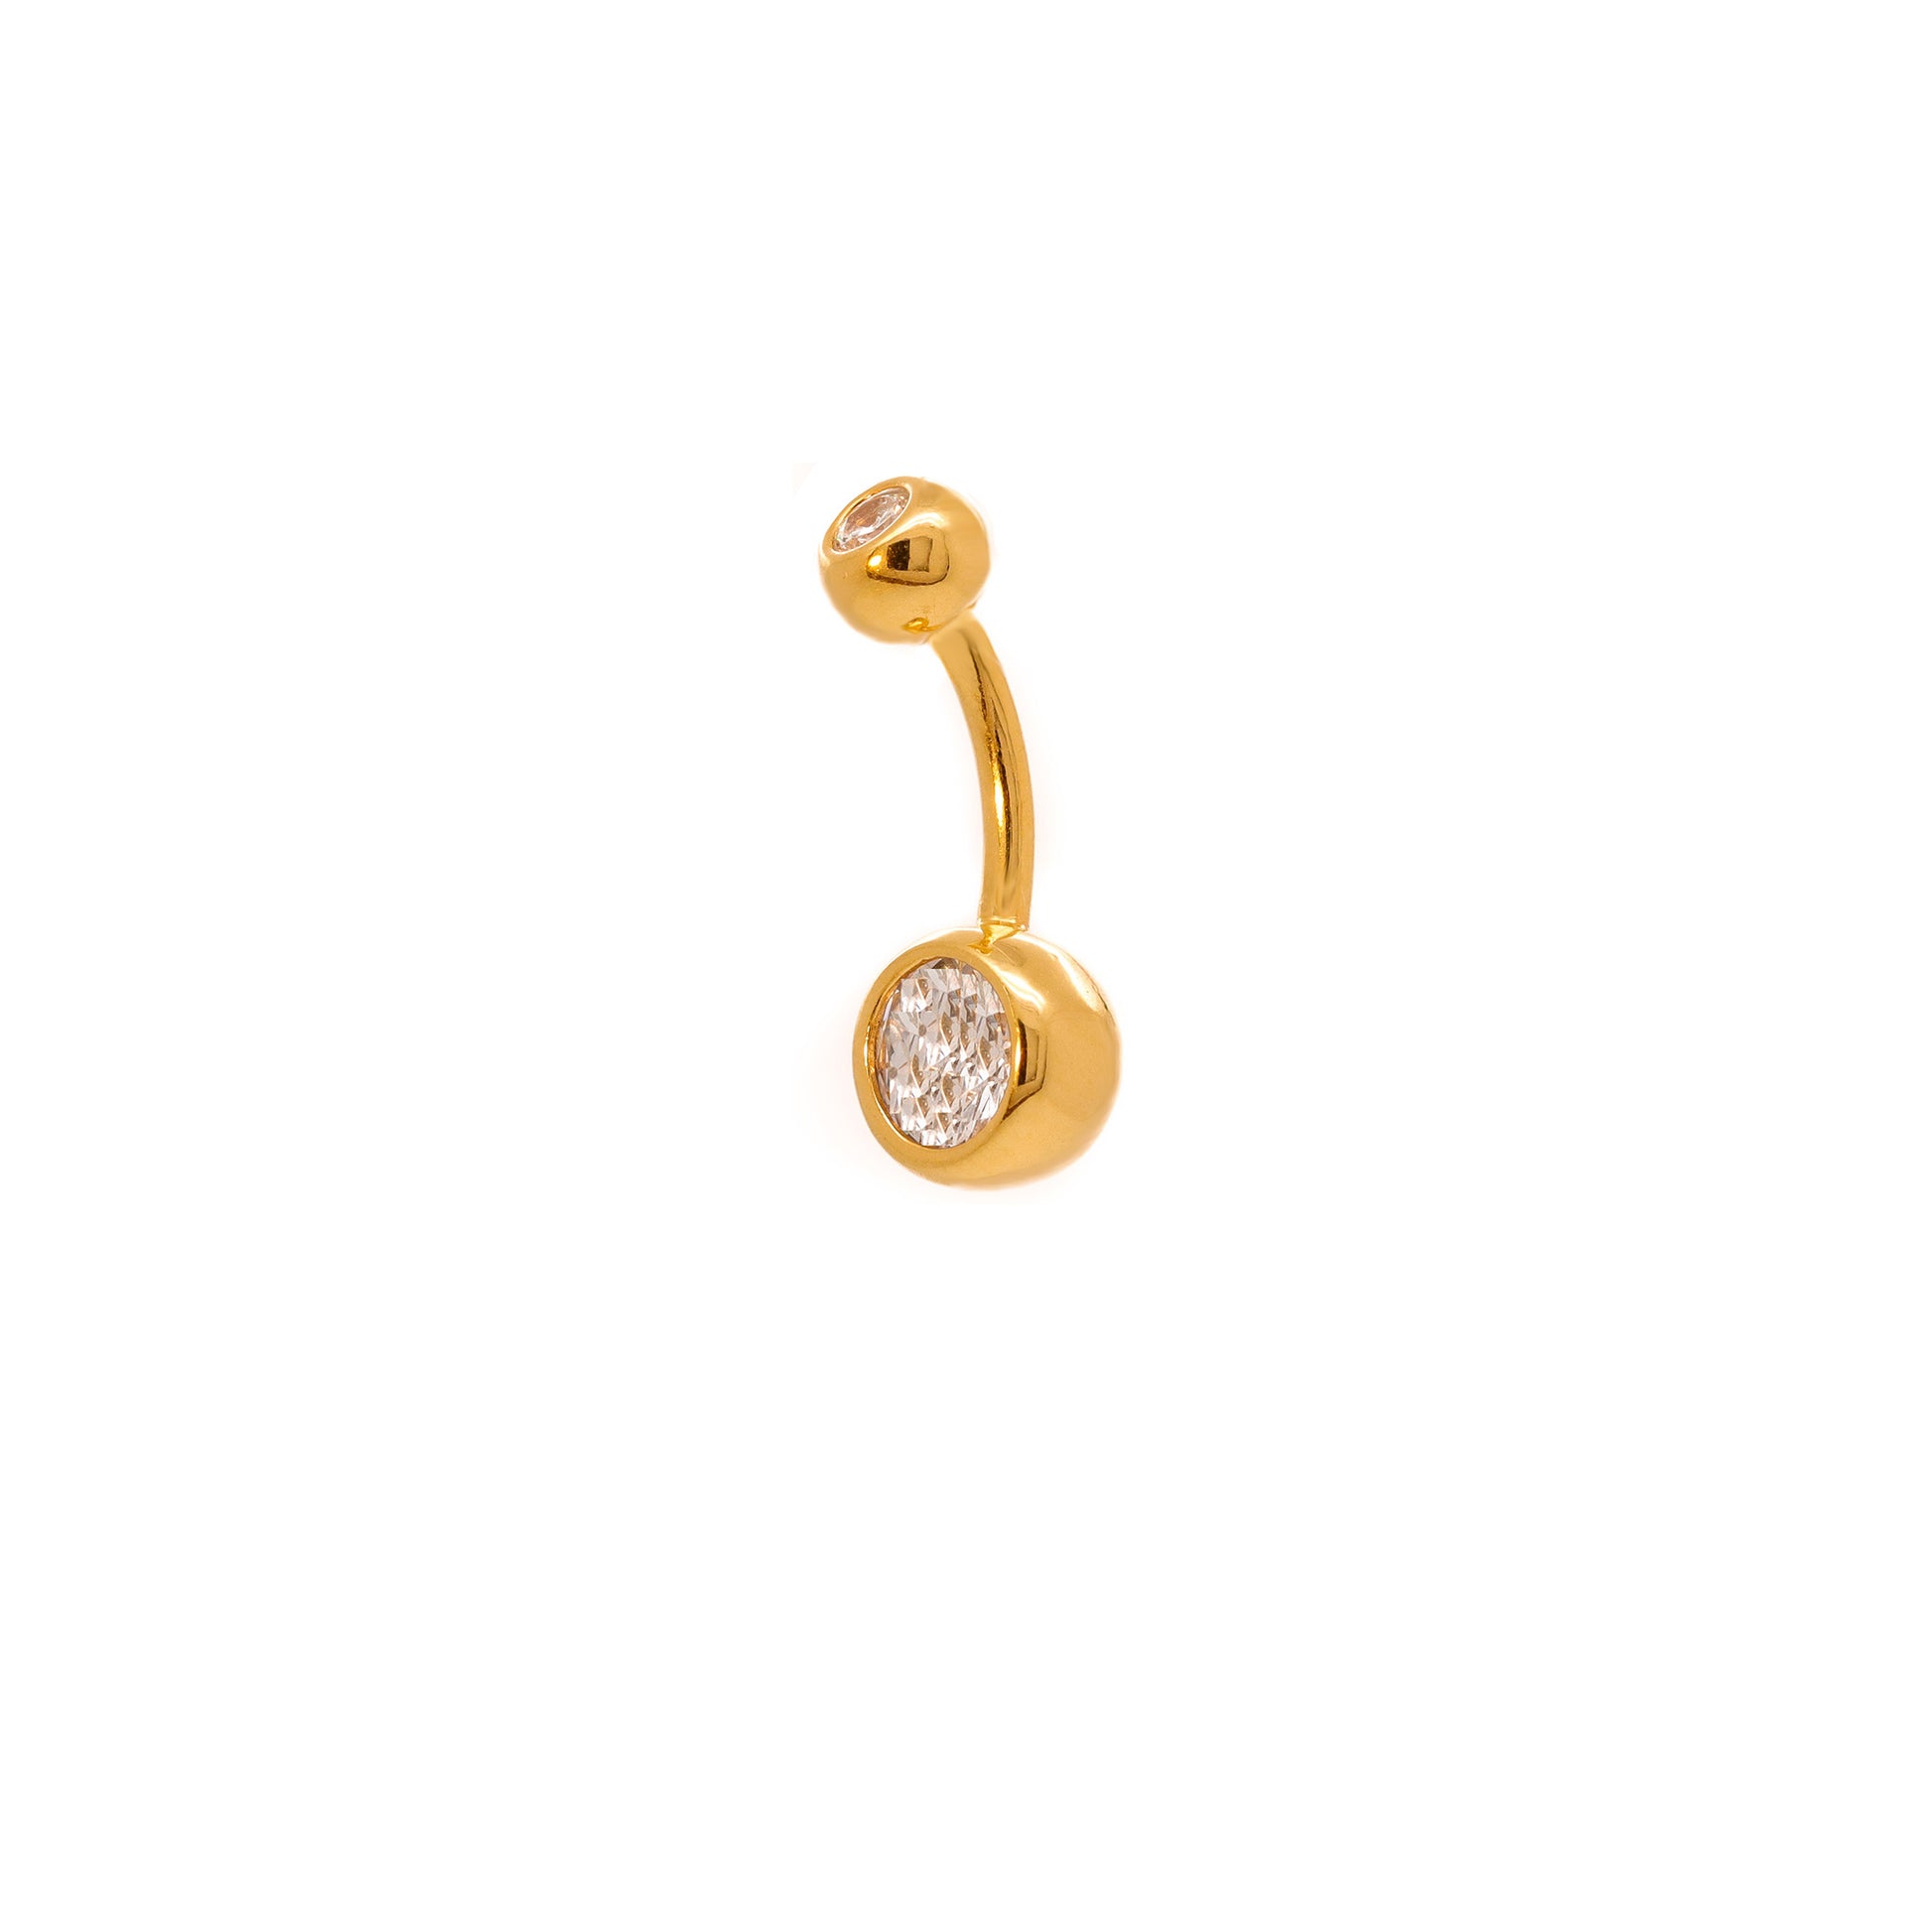 Vermeil | 925 Silver 24k Gold Coated Double Jeweled Belly Ring | 6mm 1/4" 8mm 5/16" 10mm 3/8" - Sturdy South